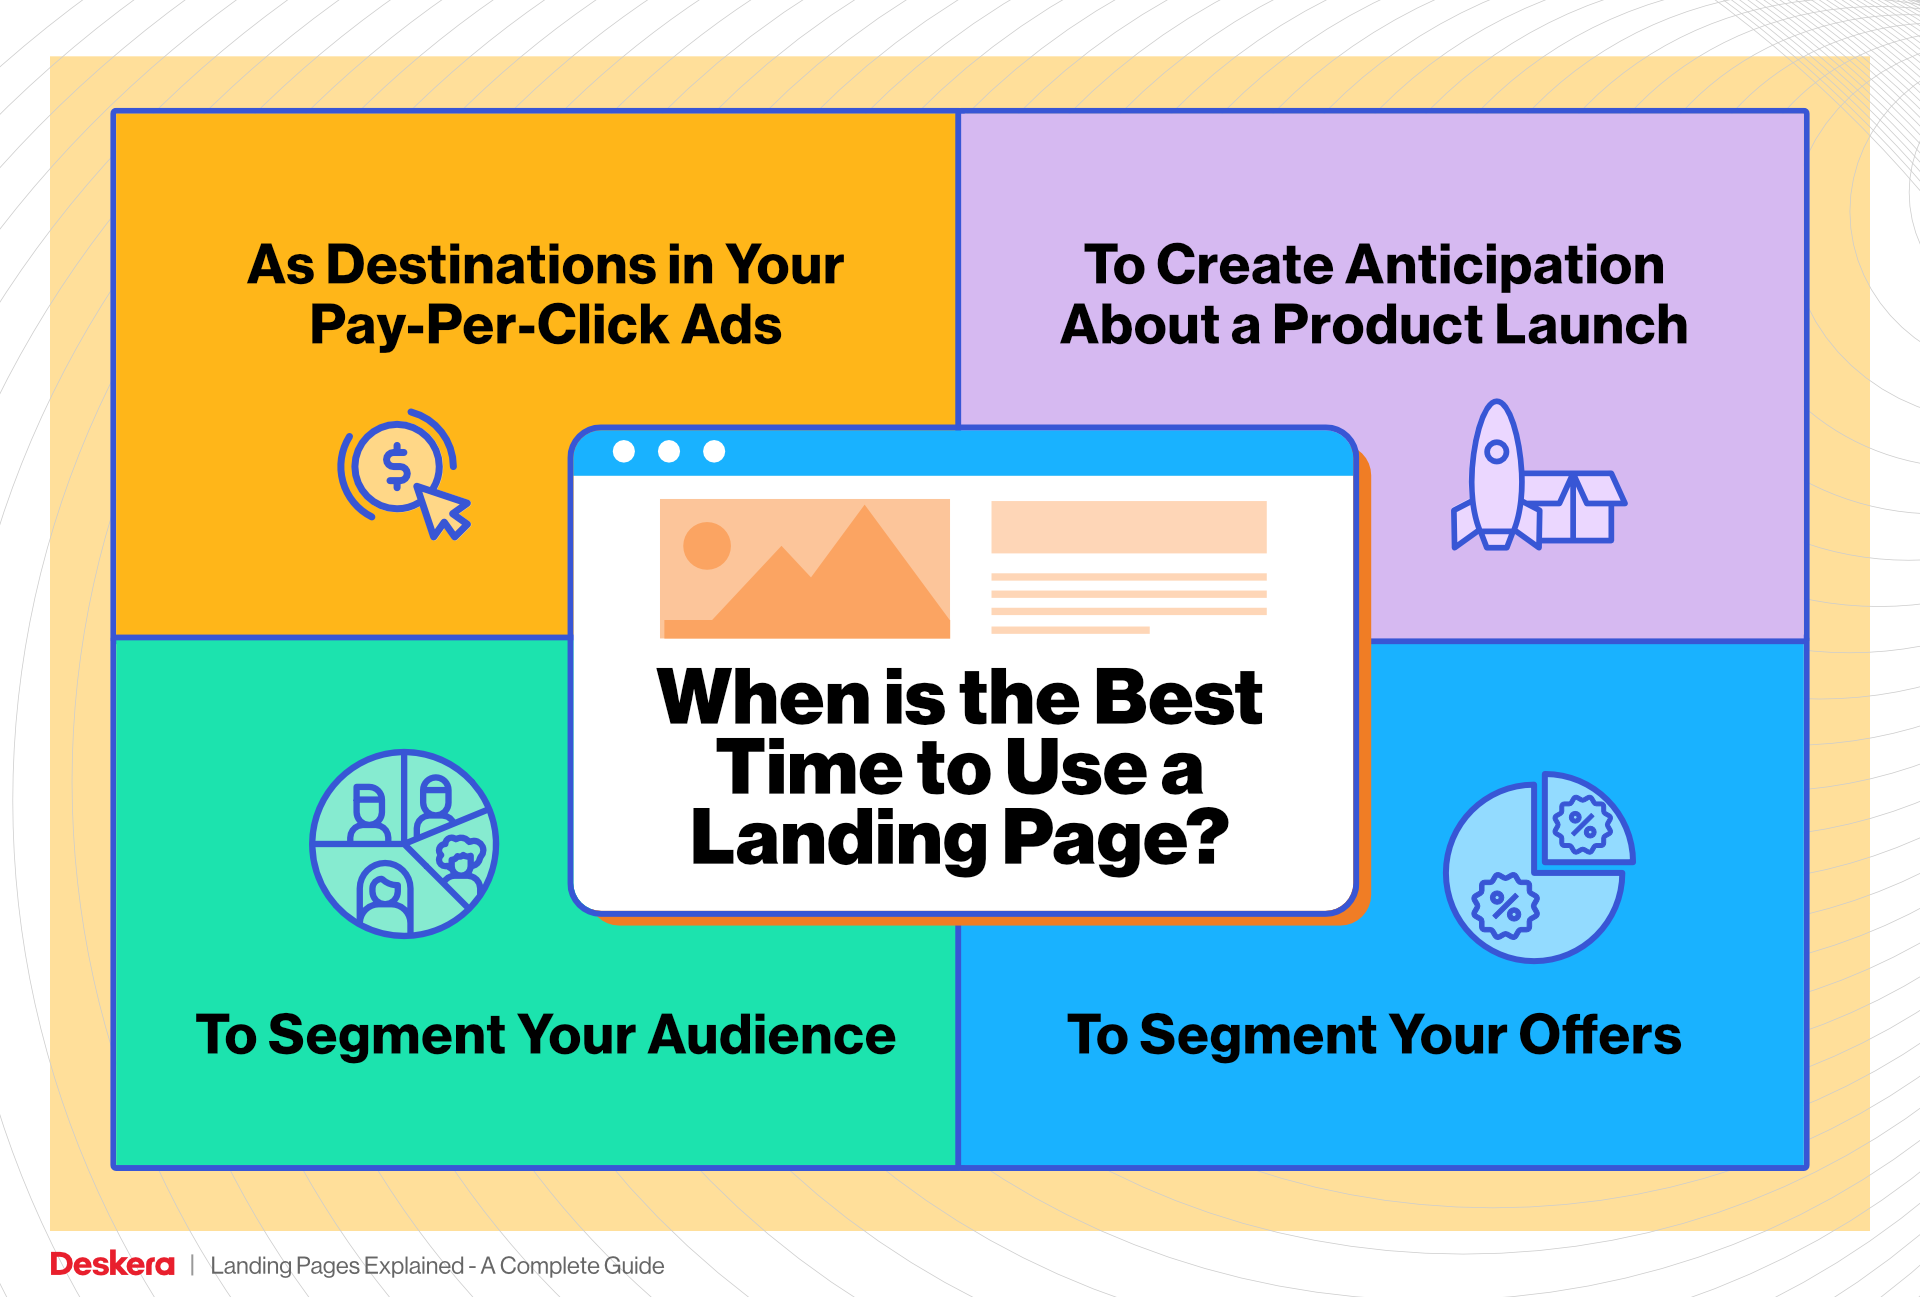 When is the Best Time to Use a Landing Page?